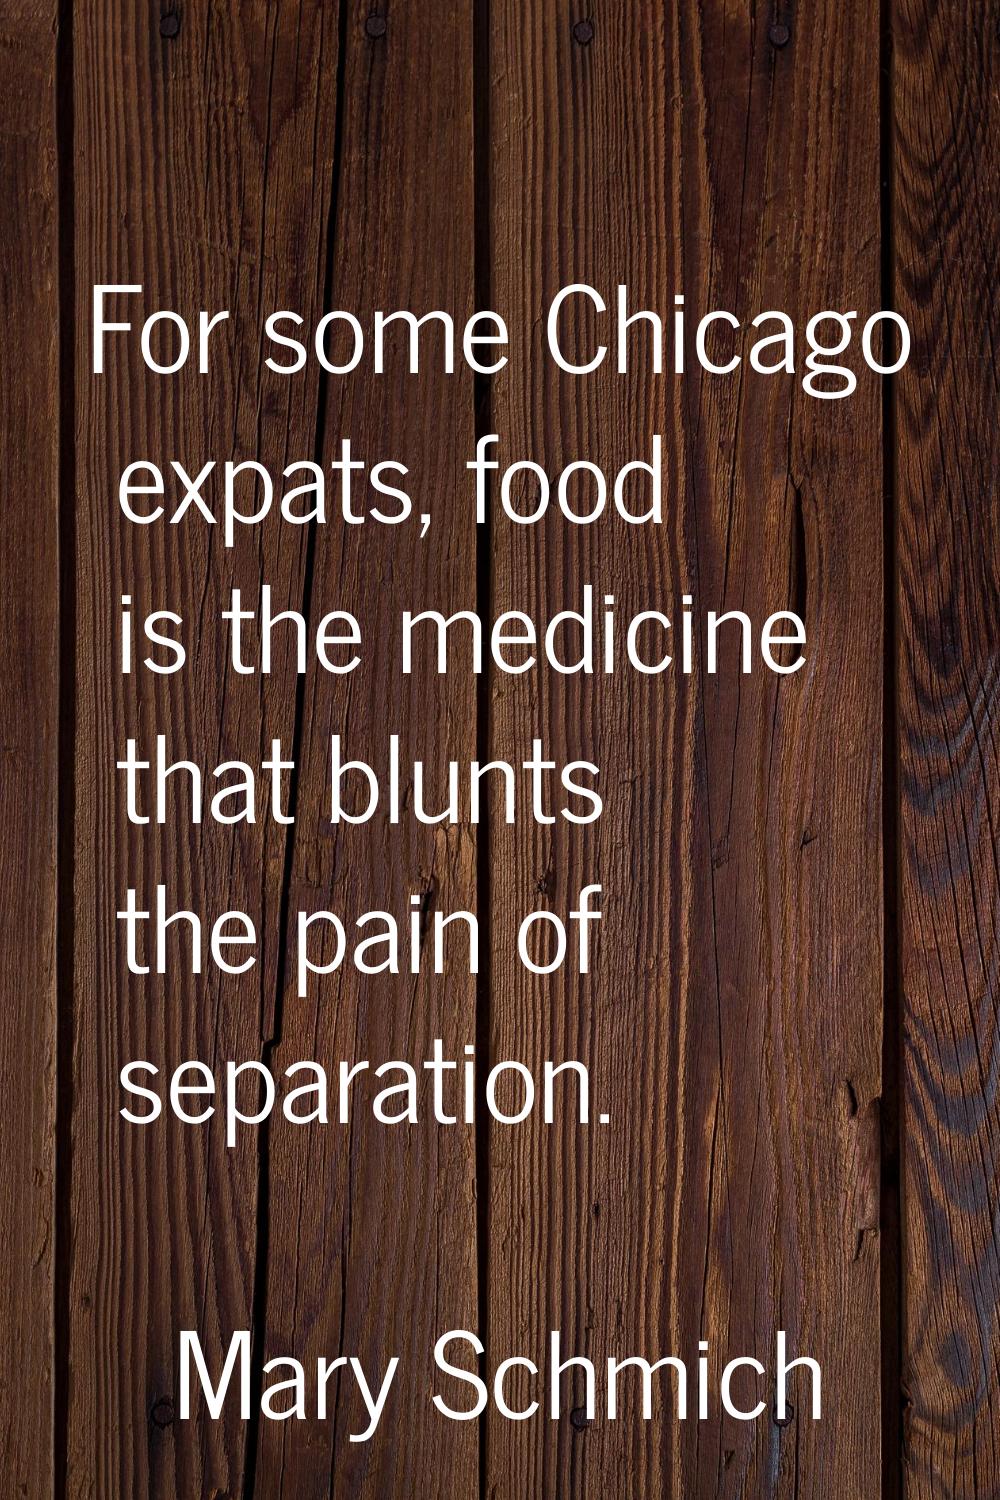 For some Chicago expats, food is the medicine that blunts the pain of separation.